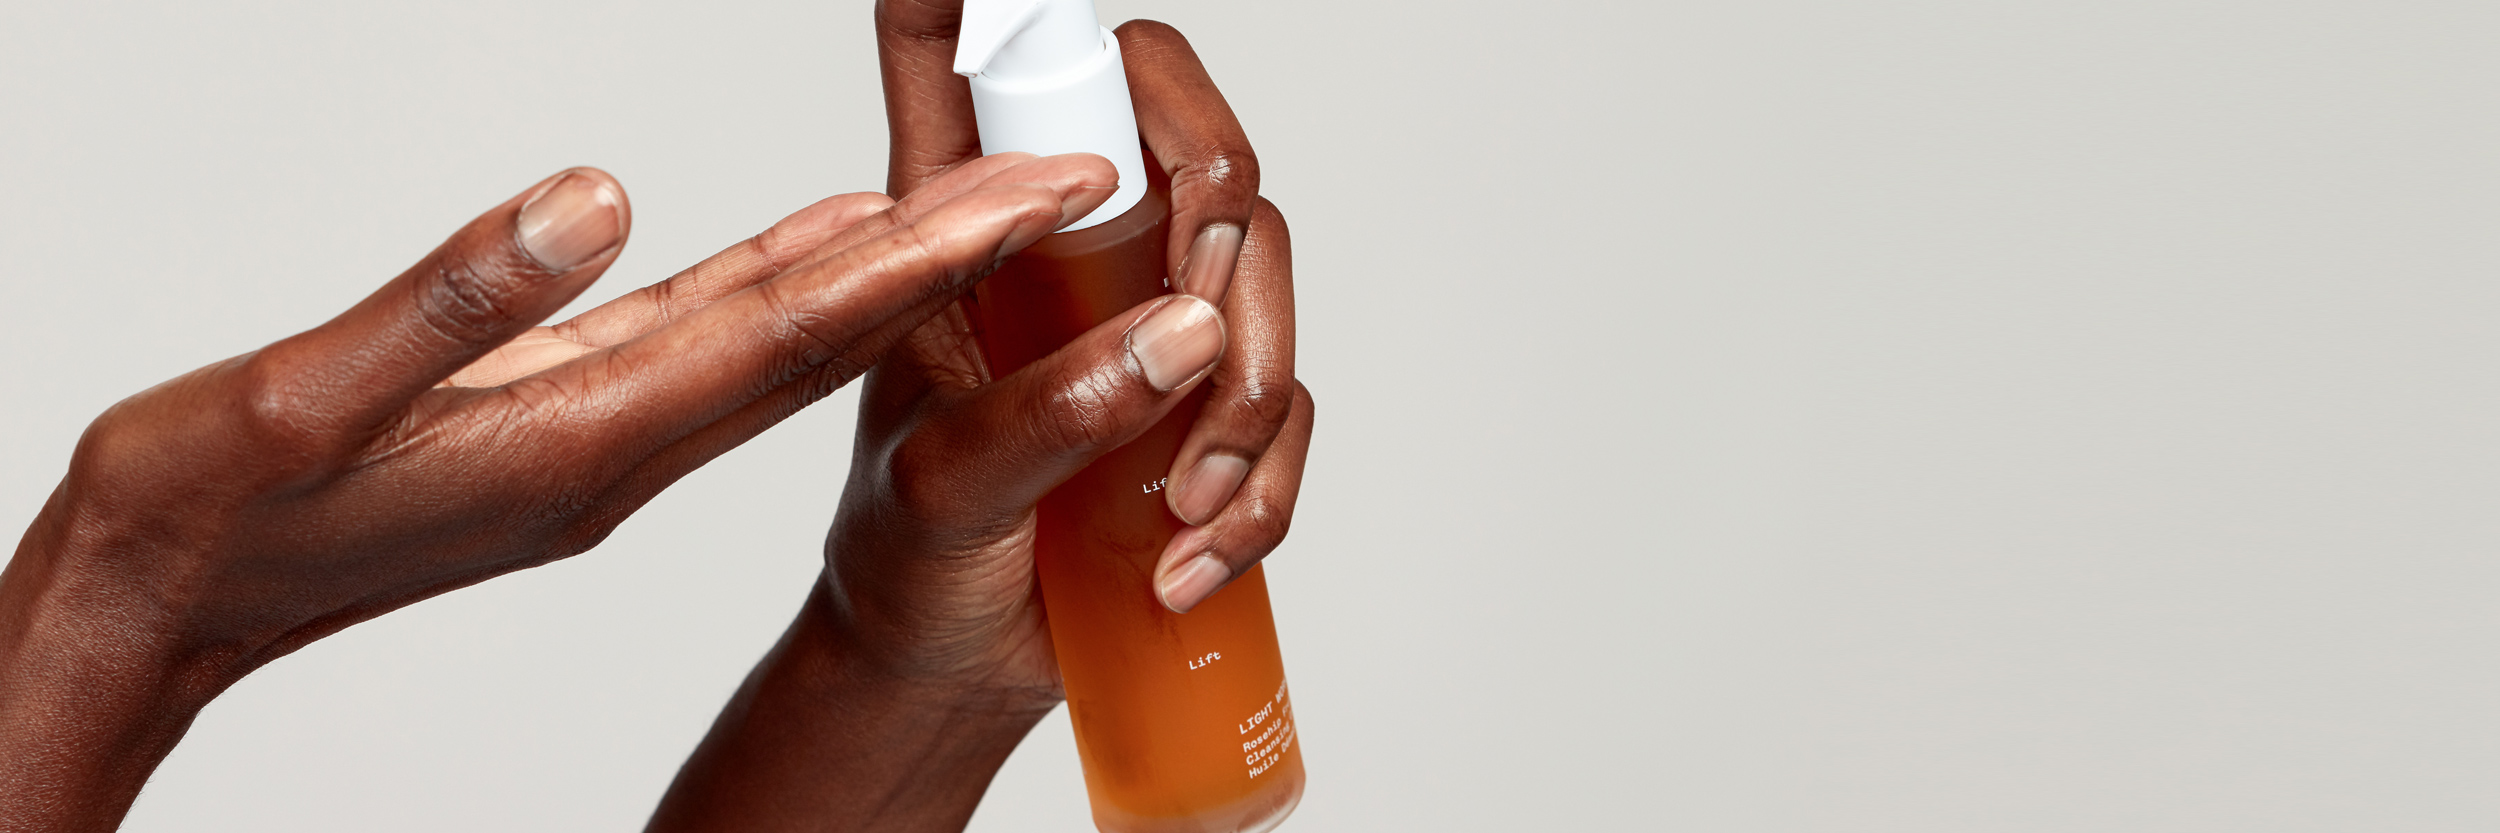 A hand holds a Pai product in an orange bottle and applies the product to the person's other hand.